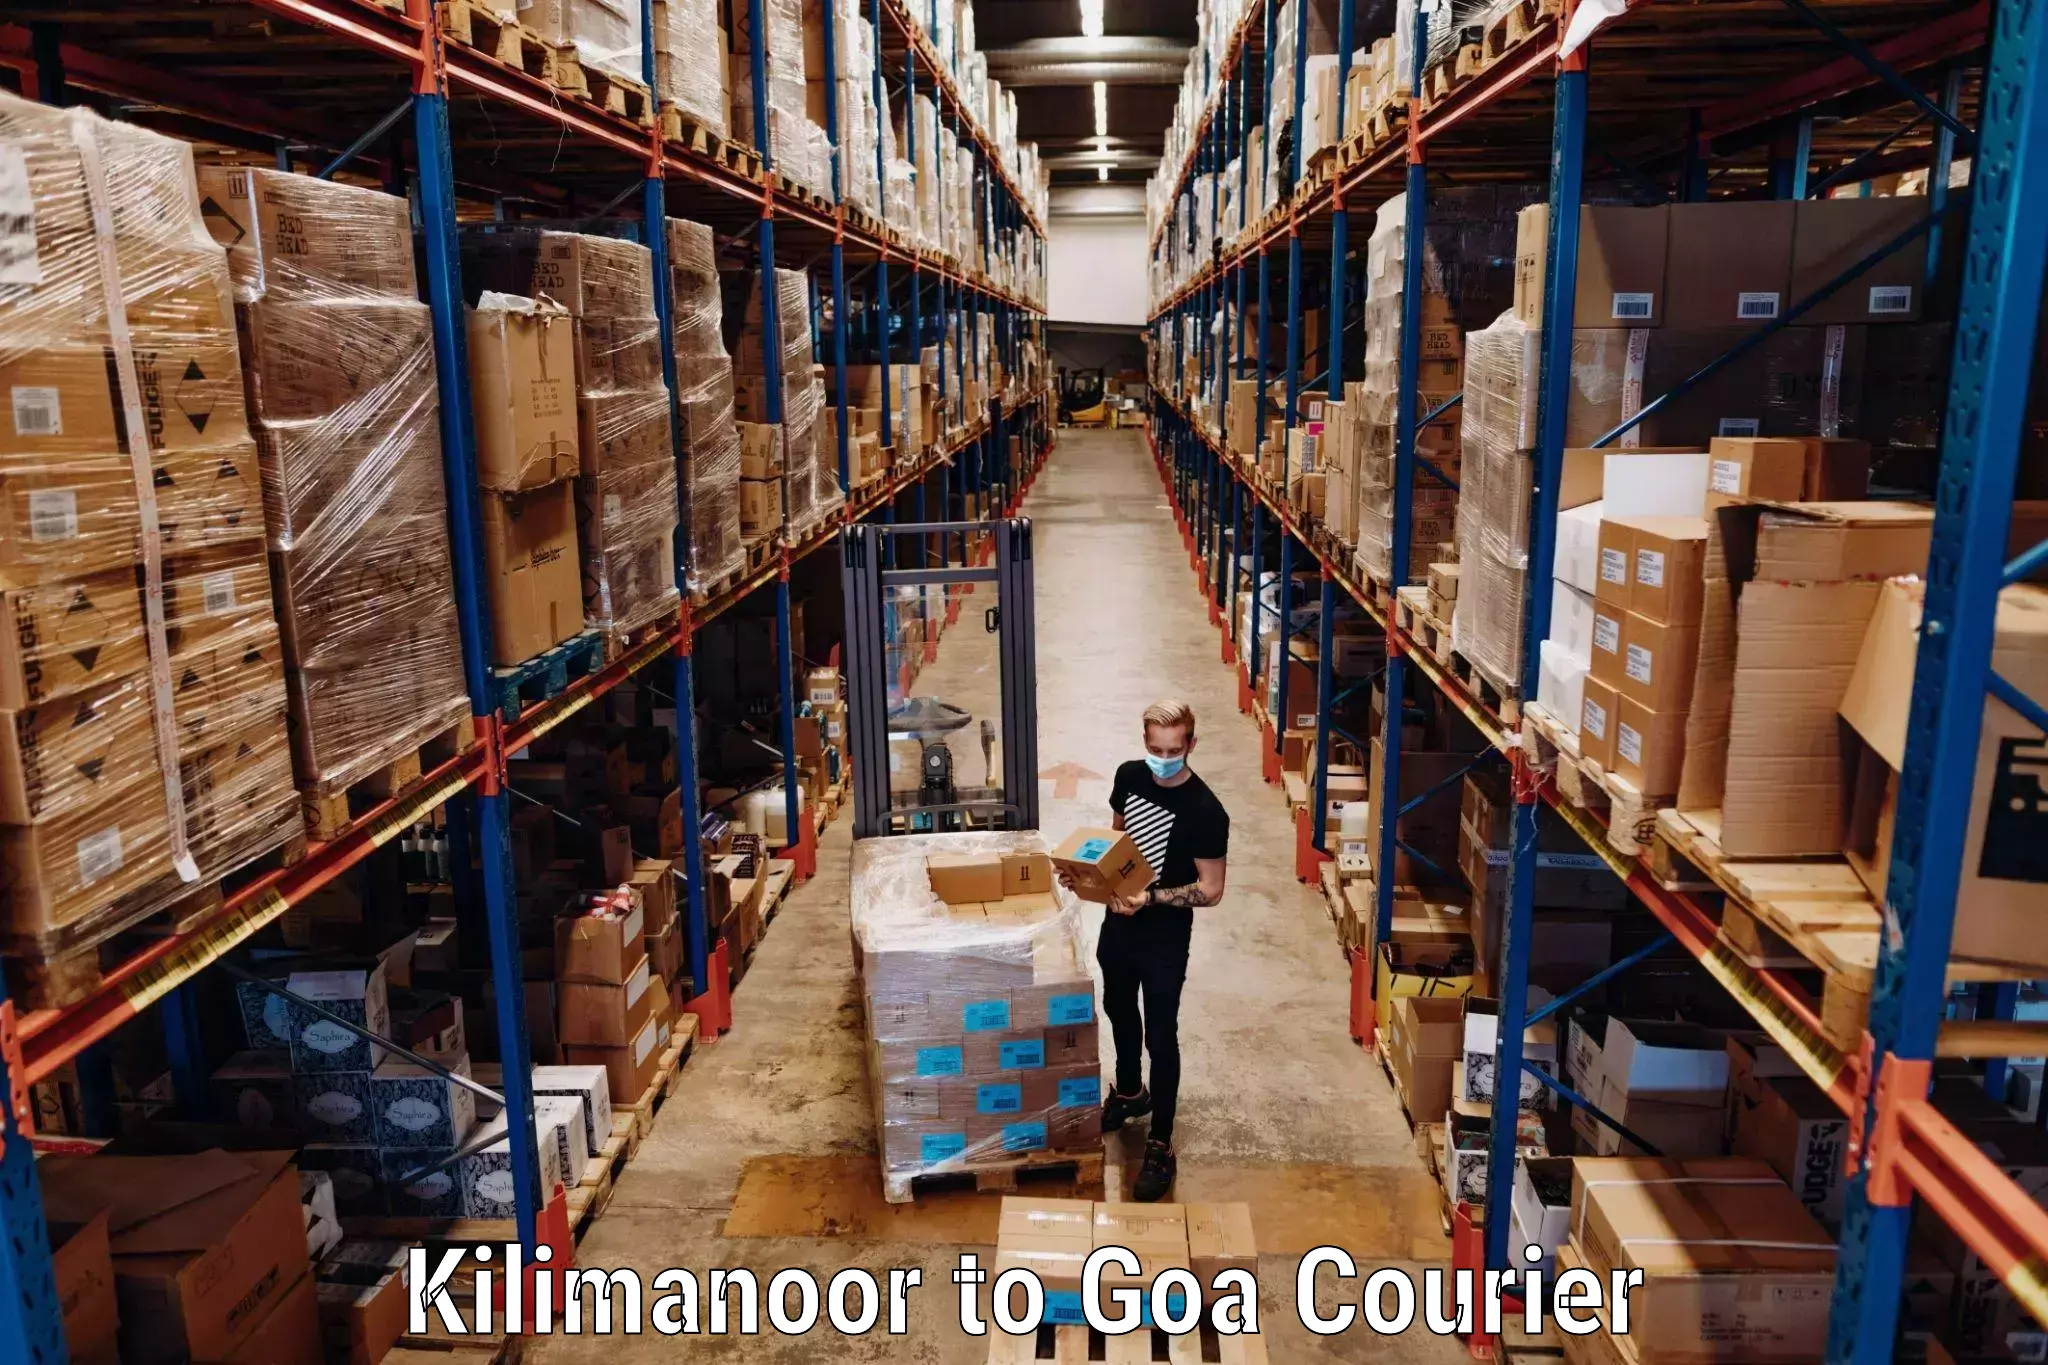 Luggage transport consultancy Kilimanoor to Goa